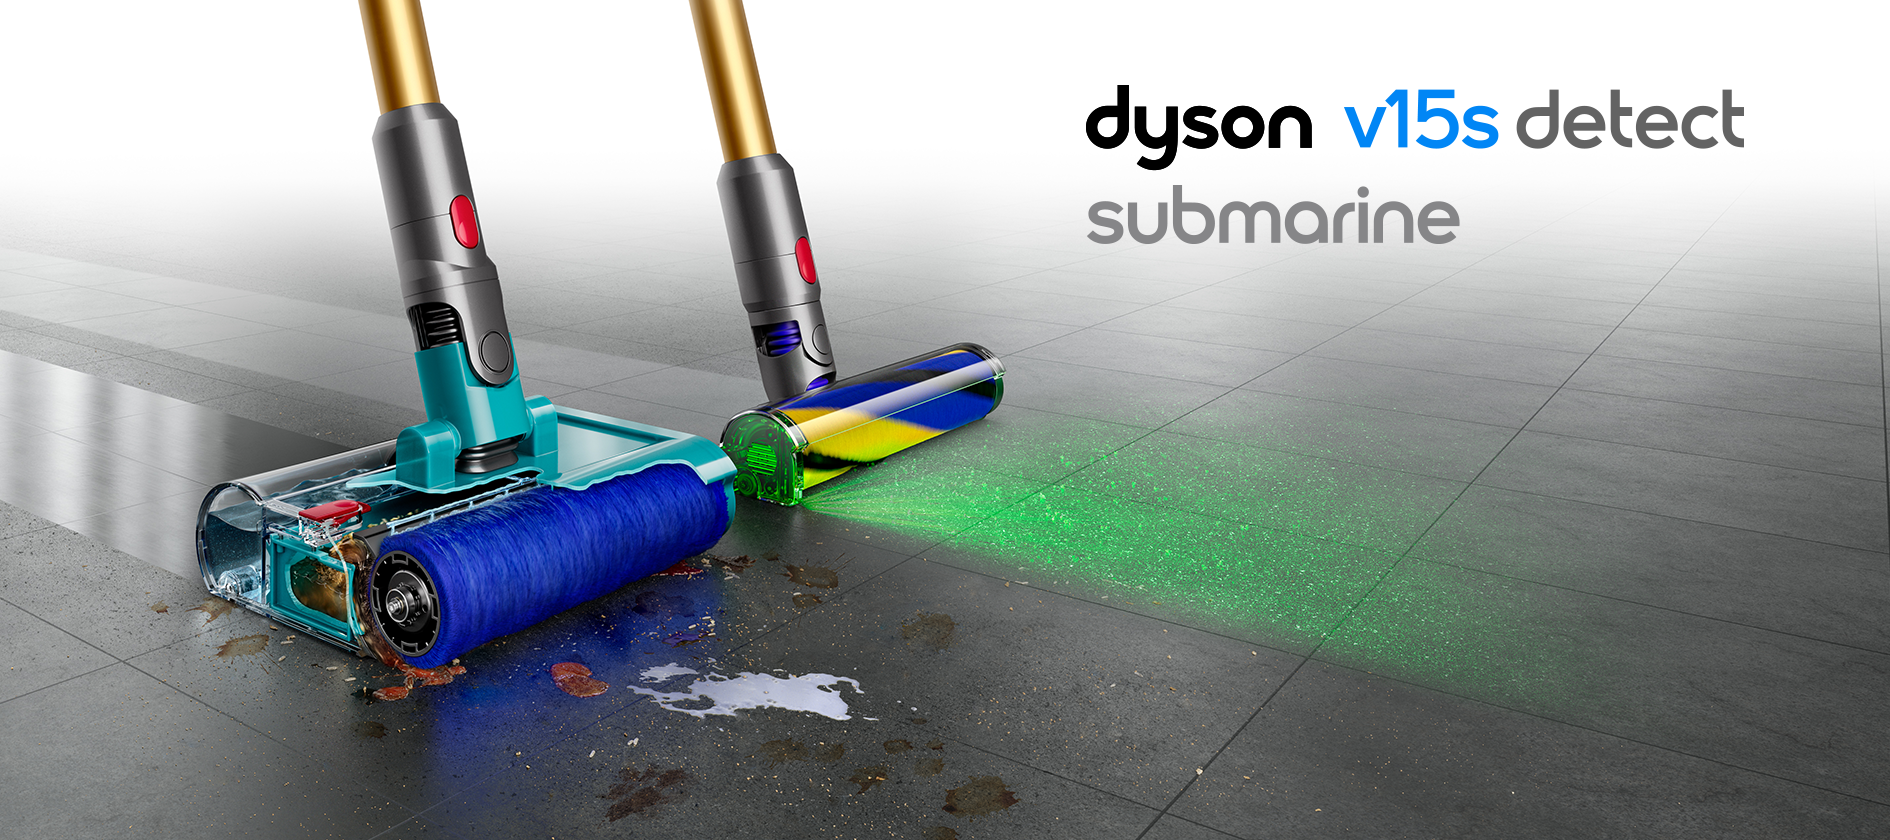 Dyson V15s Detect Submarine™ - Now available in Germany, Singapore, China, Hong Kong, Japan, Korea and India